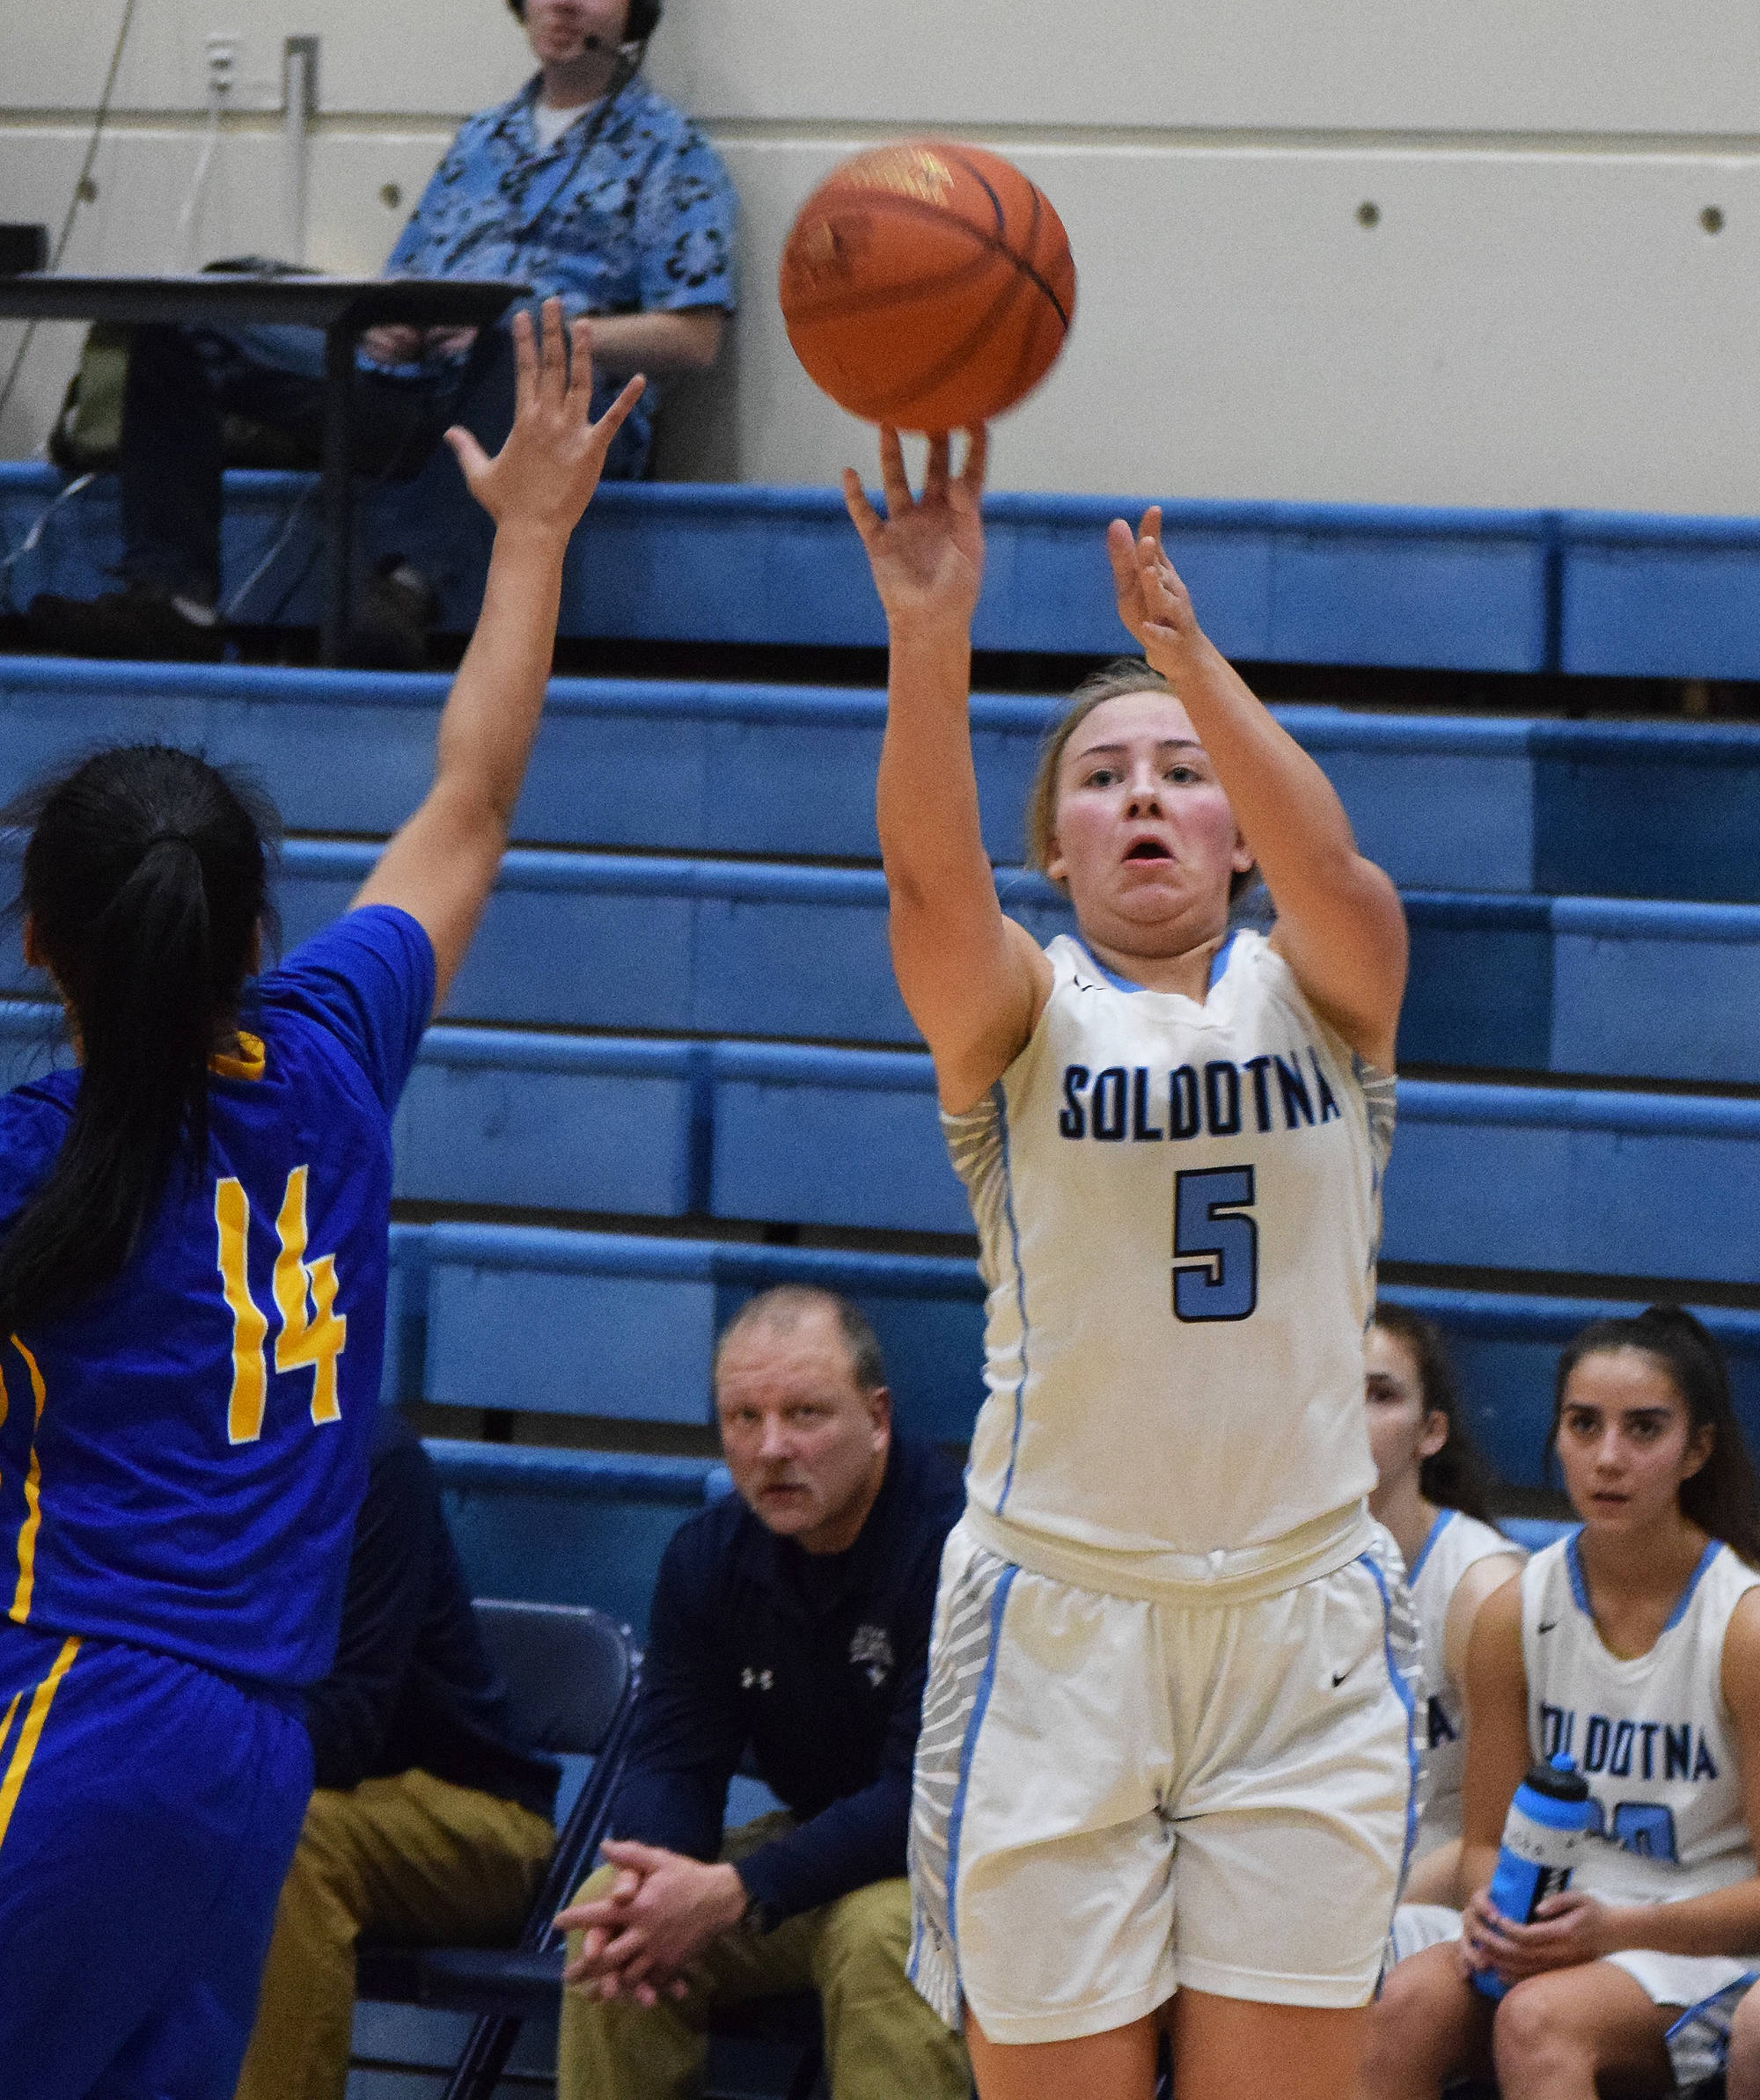 Soldotna’s Brittani Blossom launches a 3-point shot Dec. 14, 2018, over Kodiak defender Lisa Marcelo at the Powerade/Al Howard Tip-Off tournament at Soldotna. (Photo by Joey Klecka/Peninsula Clarion)